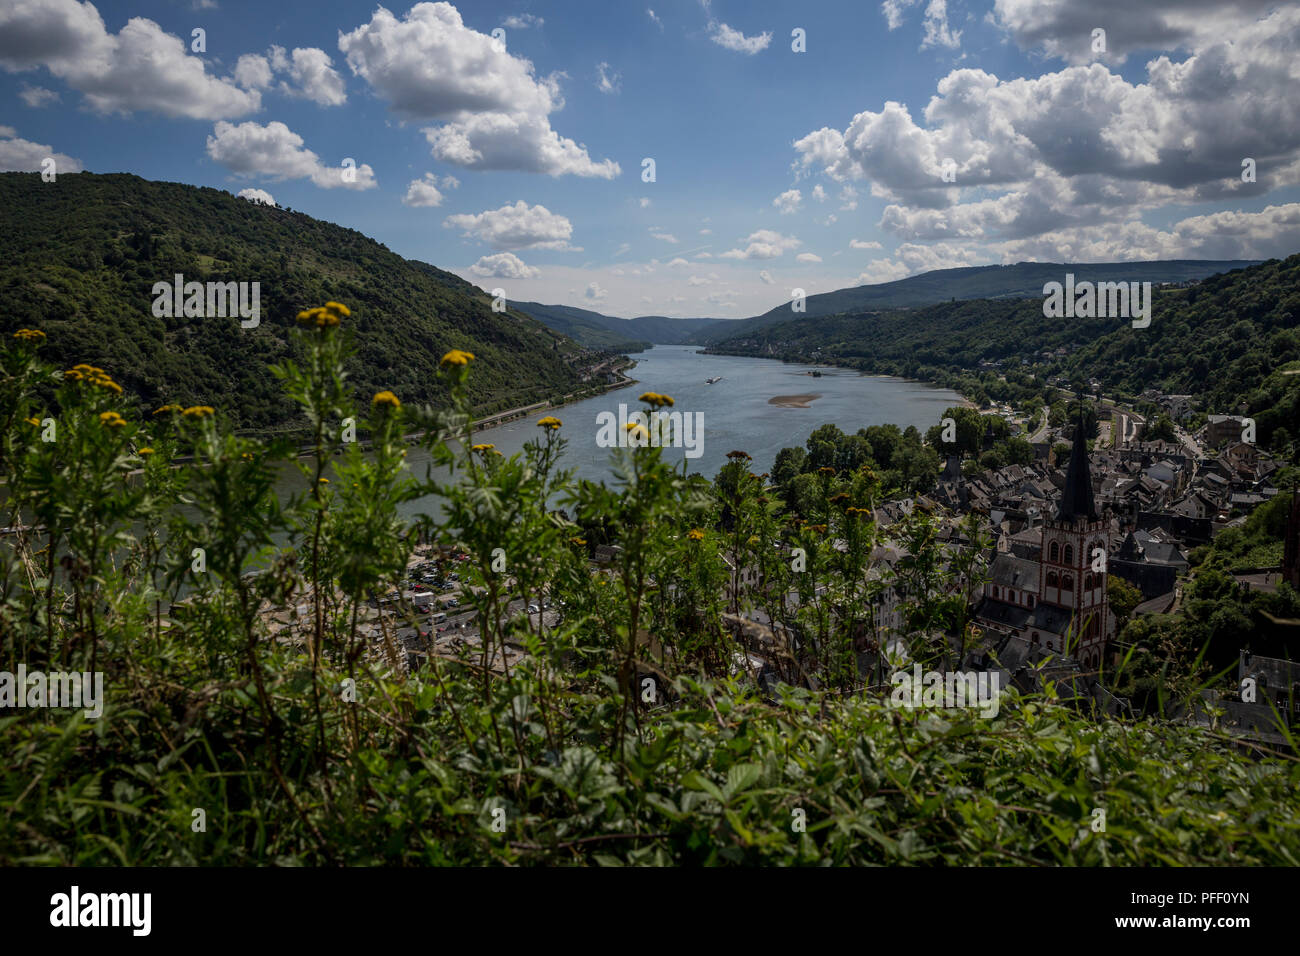 A view of Bacharach and the River Rhine from the surrounding vineyards in Bacharach, Germany. Stock Photo